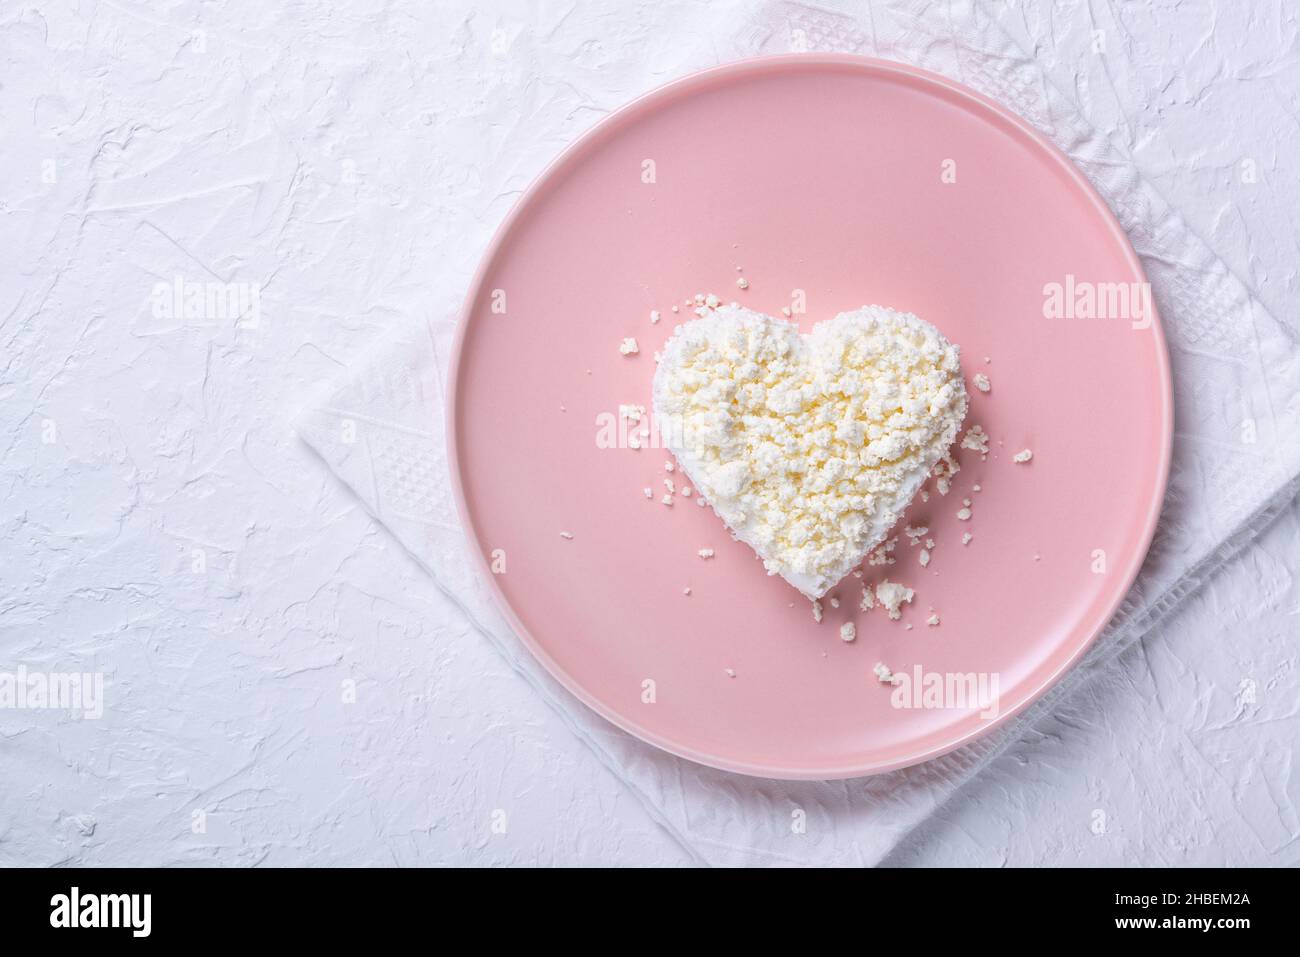 Heart shaped cottage cheese in a pink plate on a white table. Stock Photo